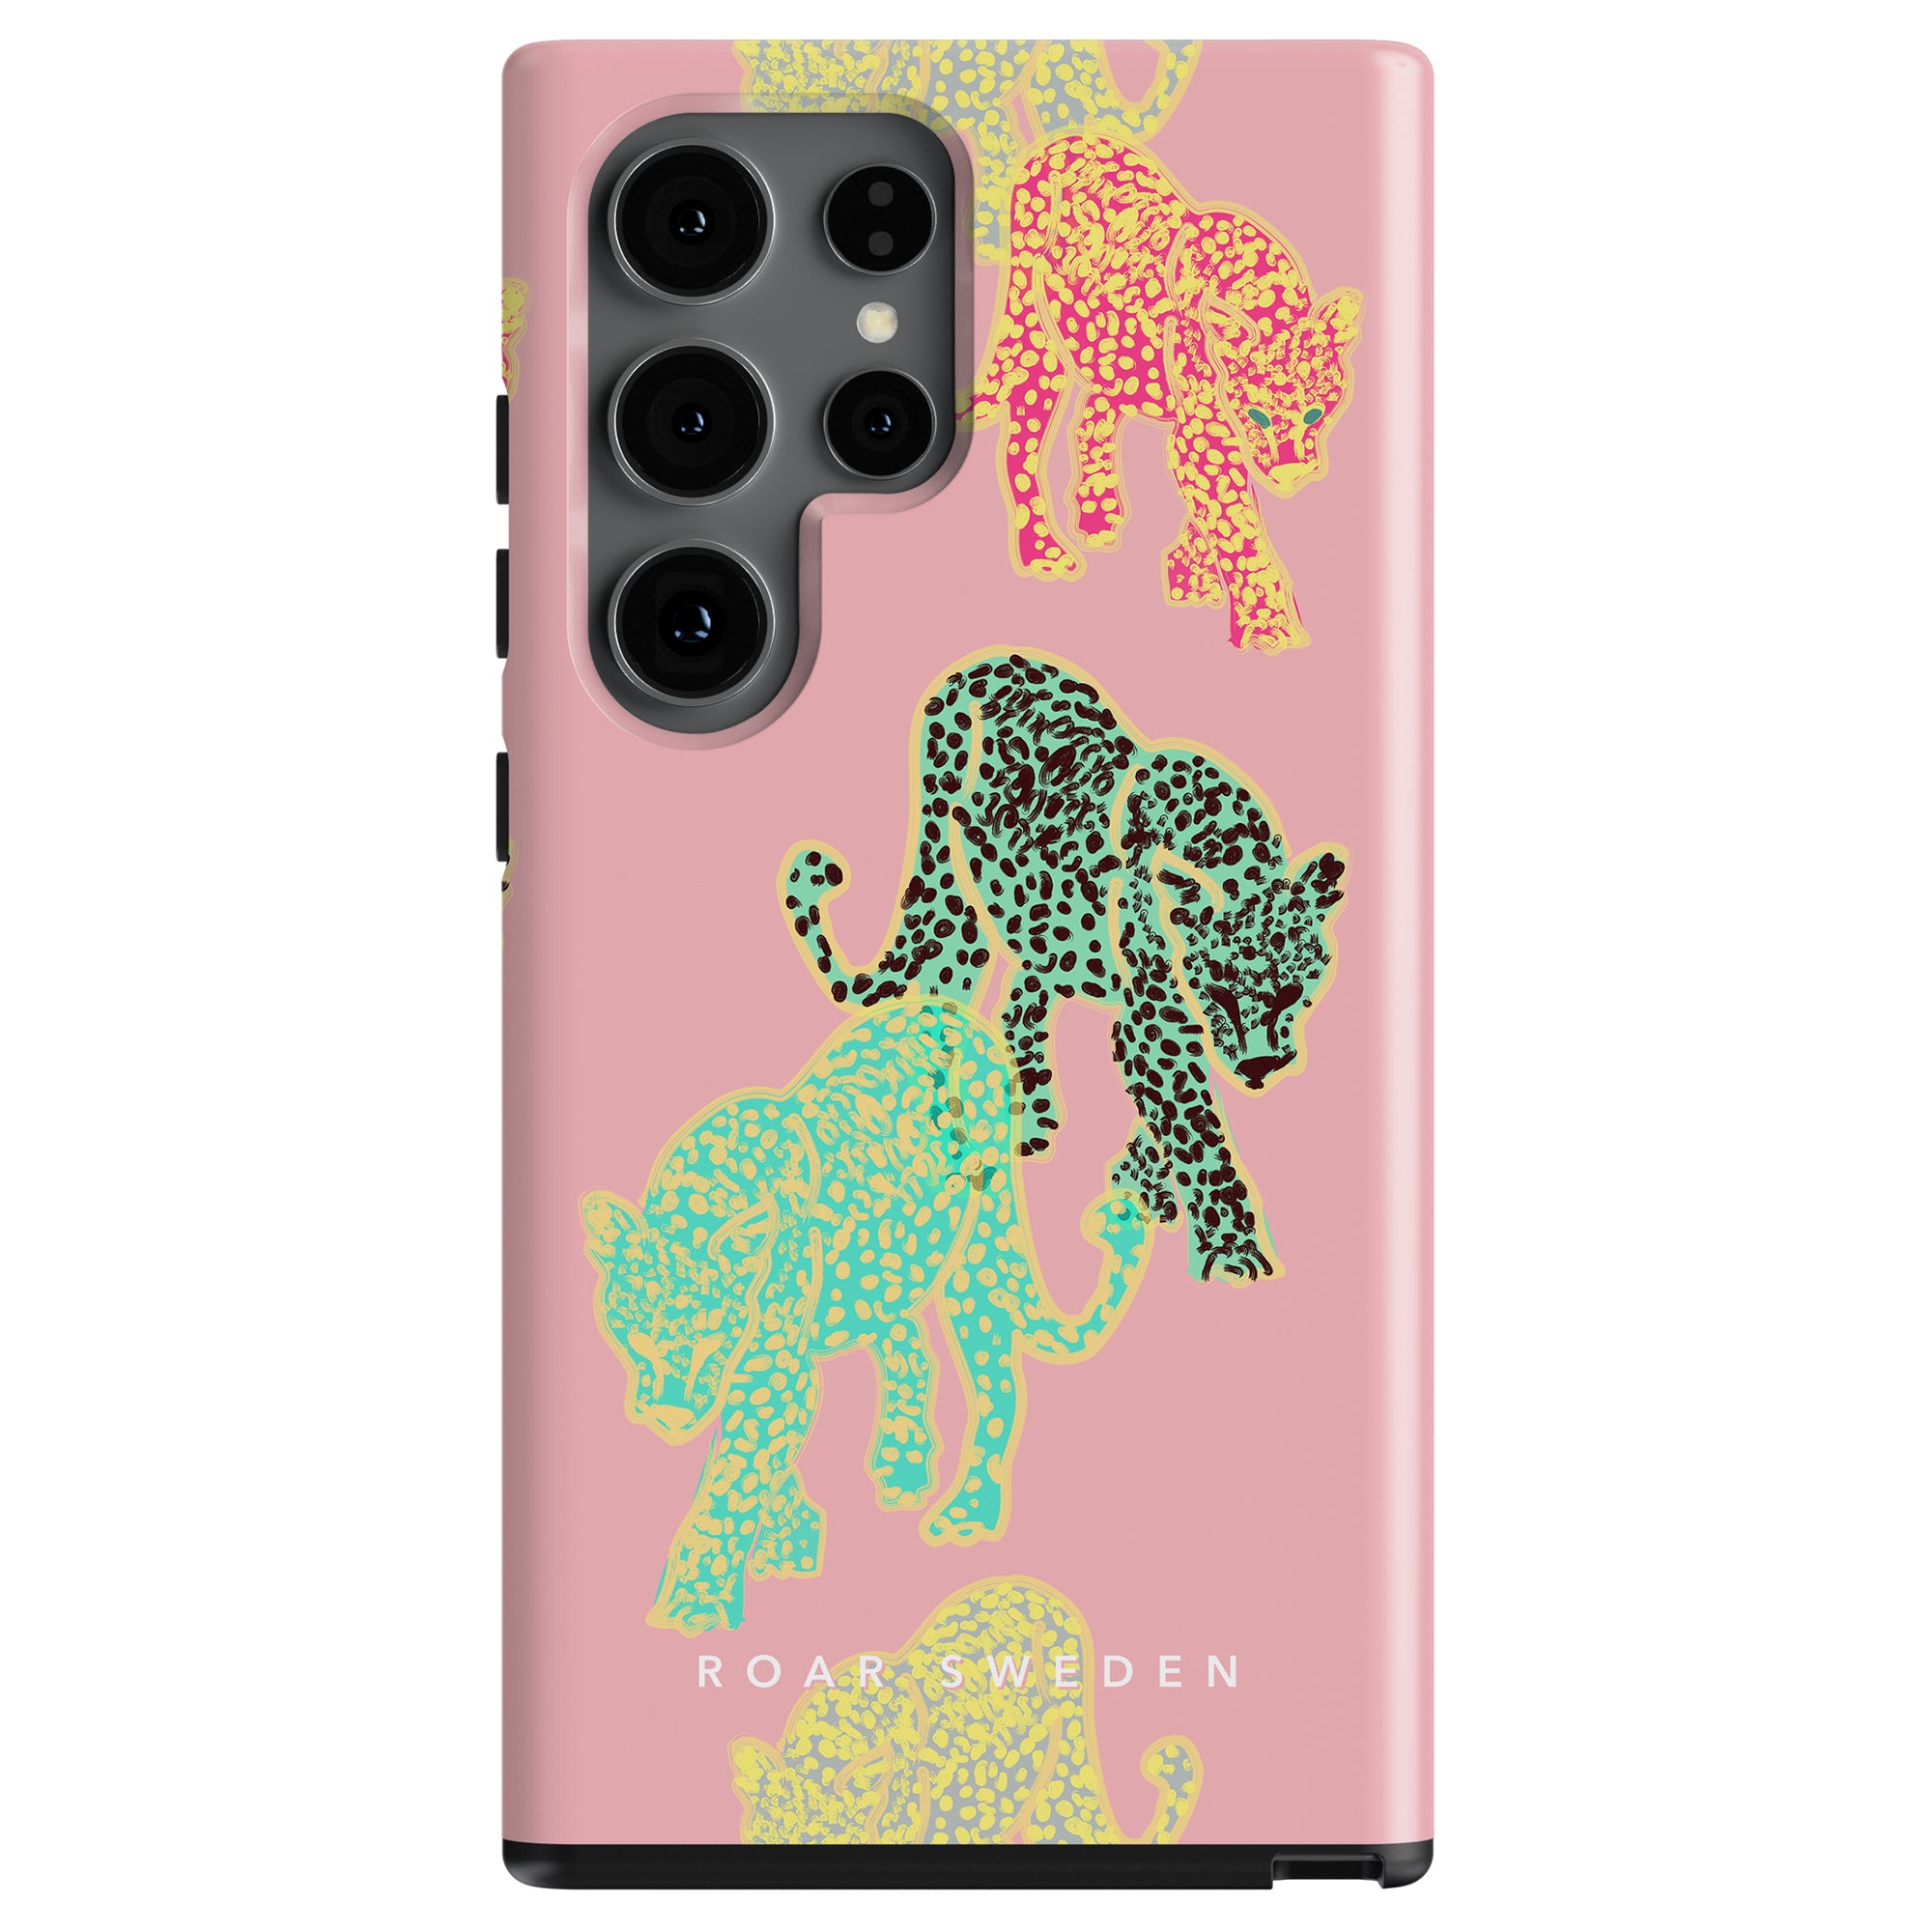 Pink Meow - Tough Case featuring a Leopard kollektion print design in green and yellow, with the brand "roar sweden" at the bottom.